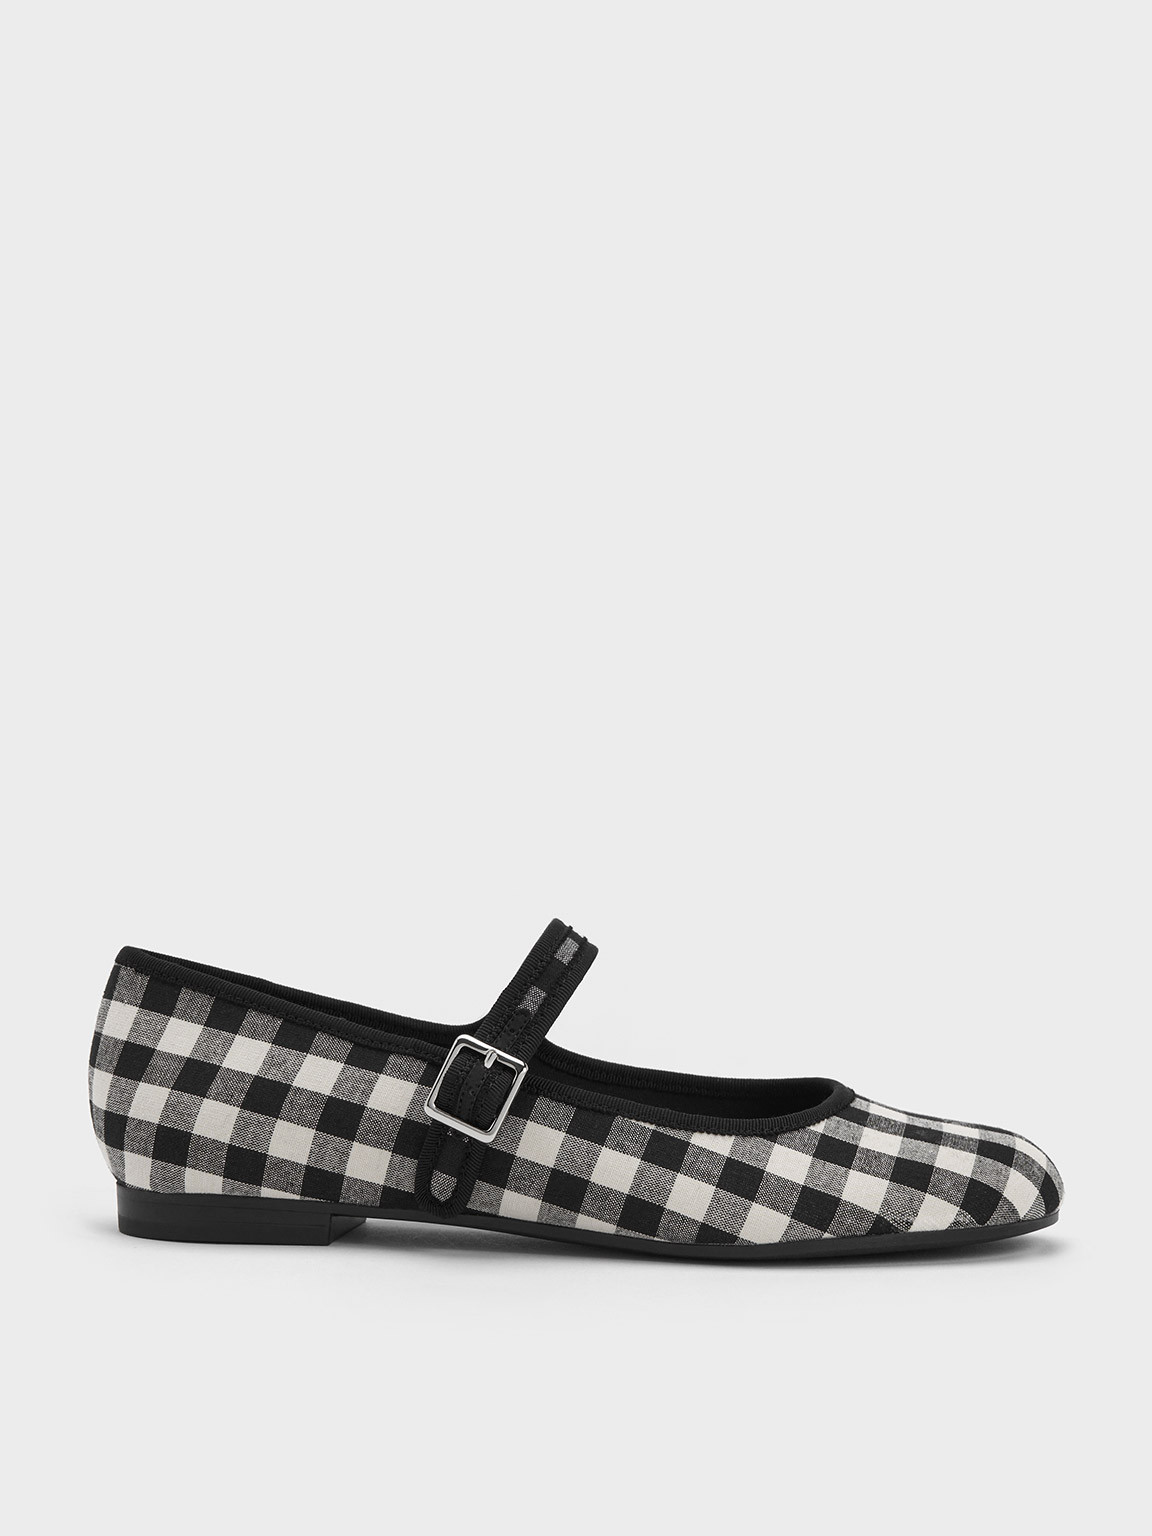 Black Textured Checkered Buckled Mary Jane Flats | CHARLES & KEITH